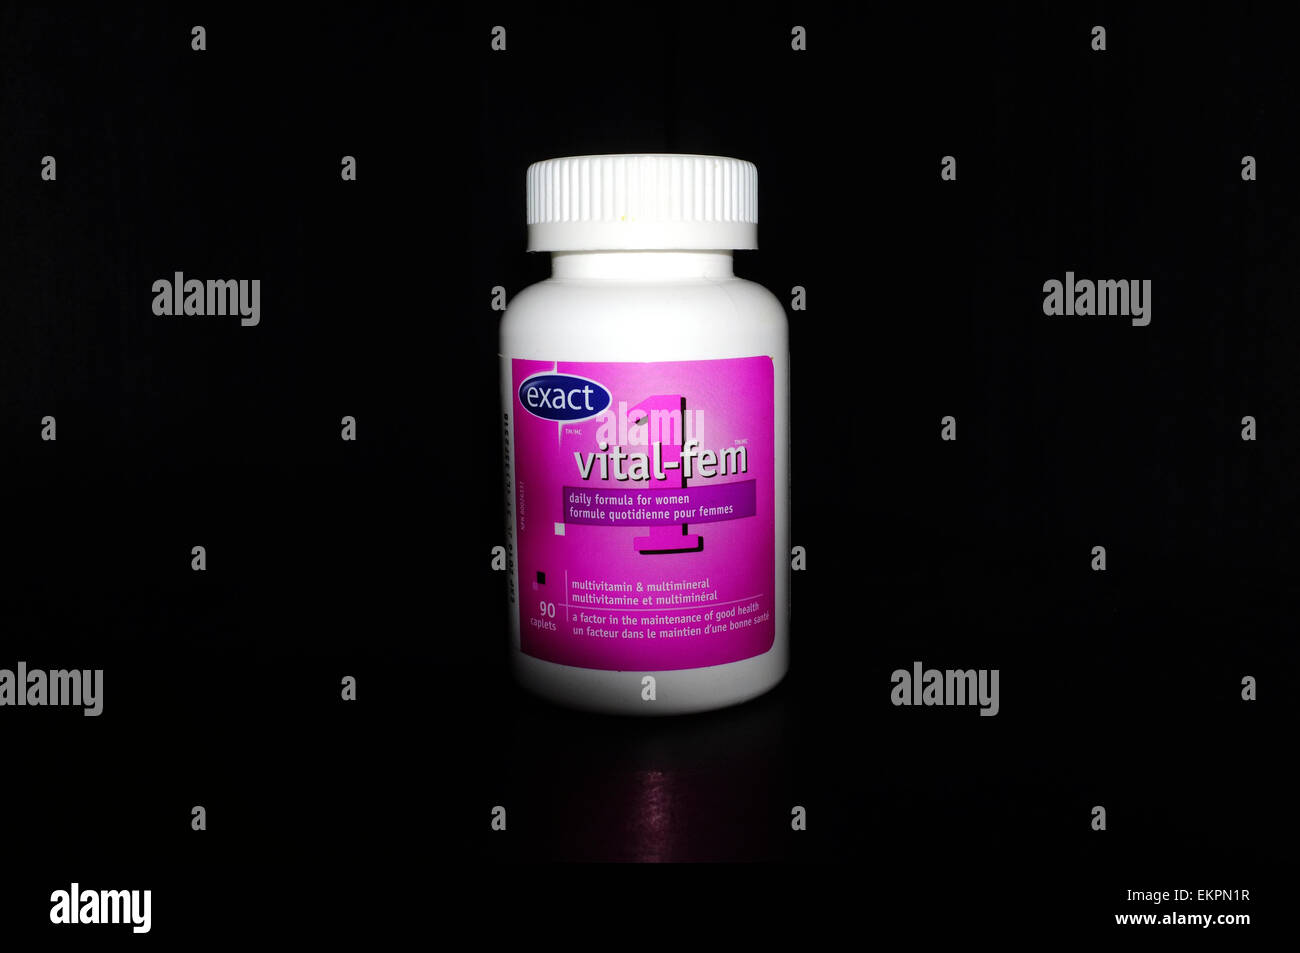 A bottle of female vitamin pills photographed against a black background. Stock Photo